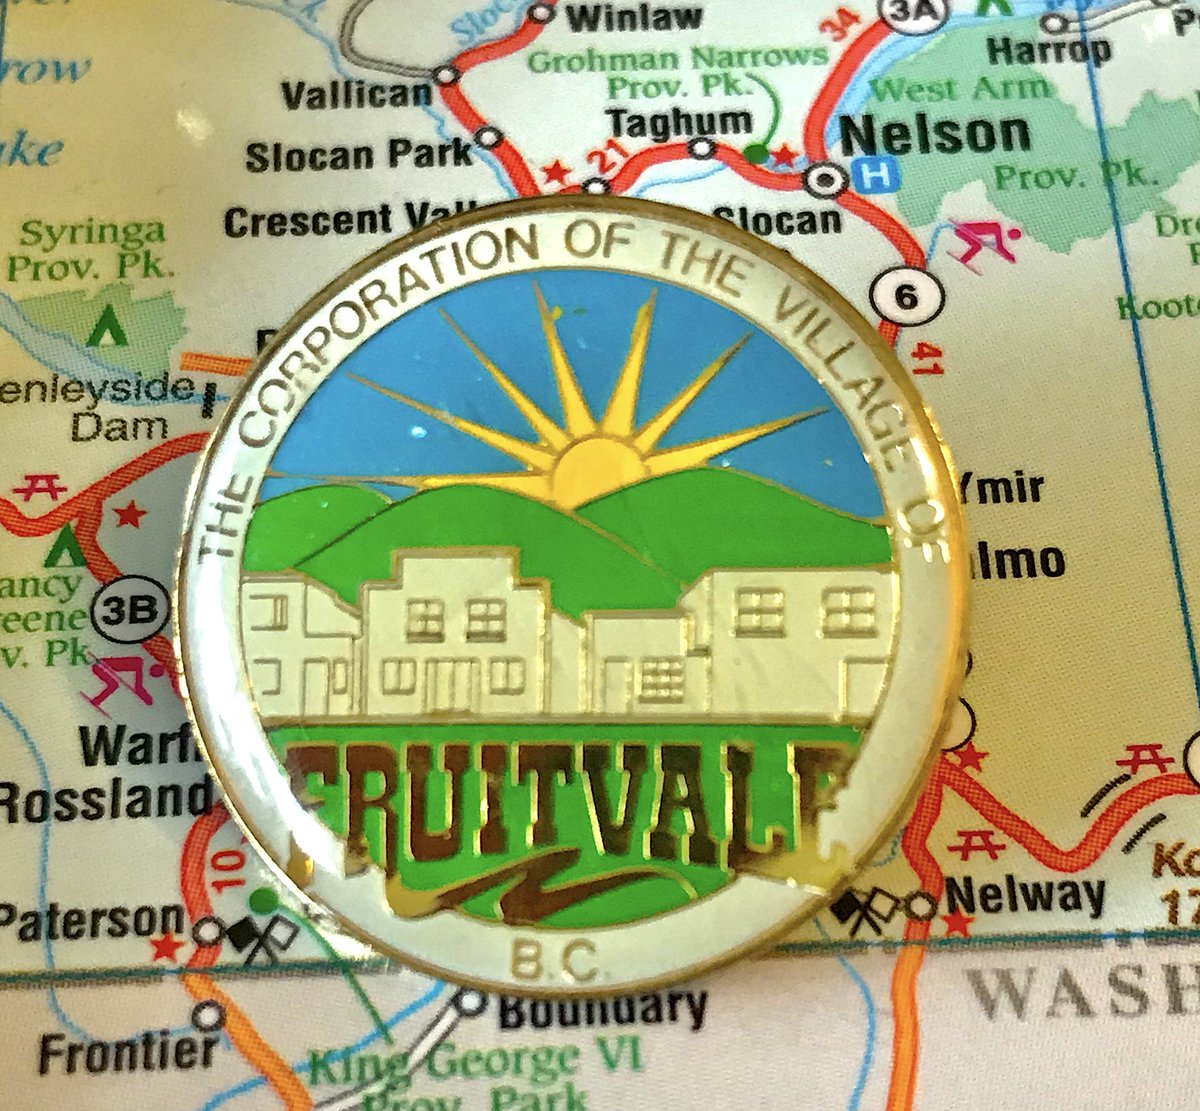 73. FRUITVALE - The Corporation of the Village of WHO CARES- Bold to show specific buildings on your pin that may not exist in future decades- Good colours, fun font for Fruitvale, fully acceptable pin